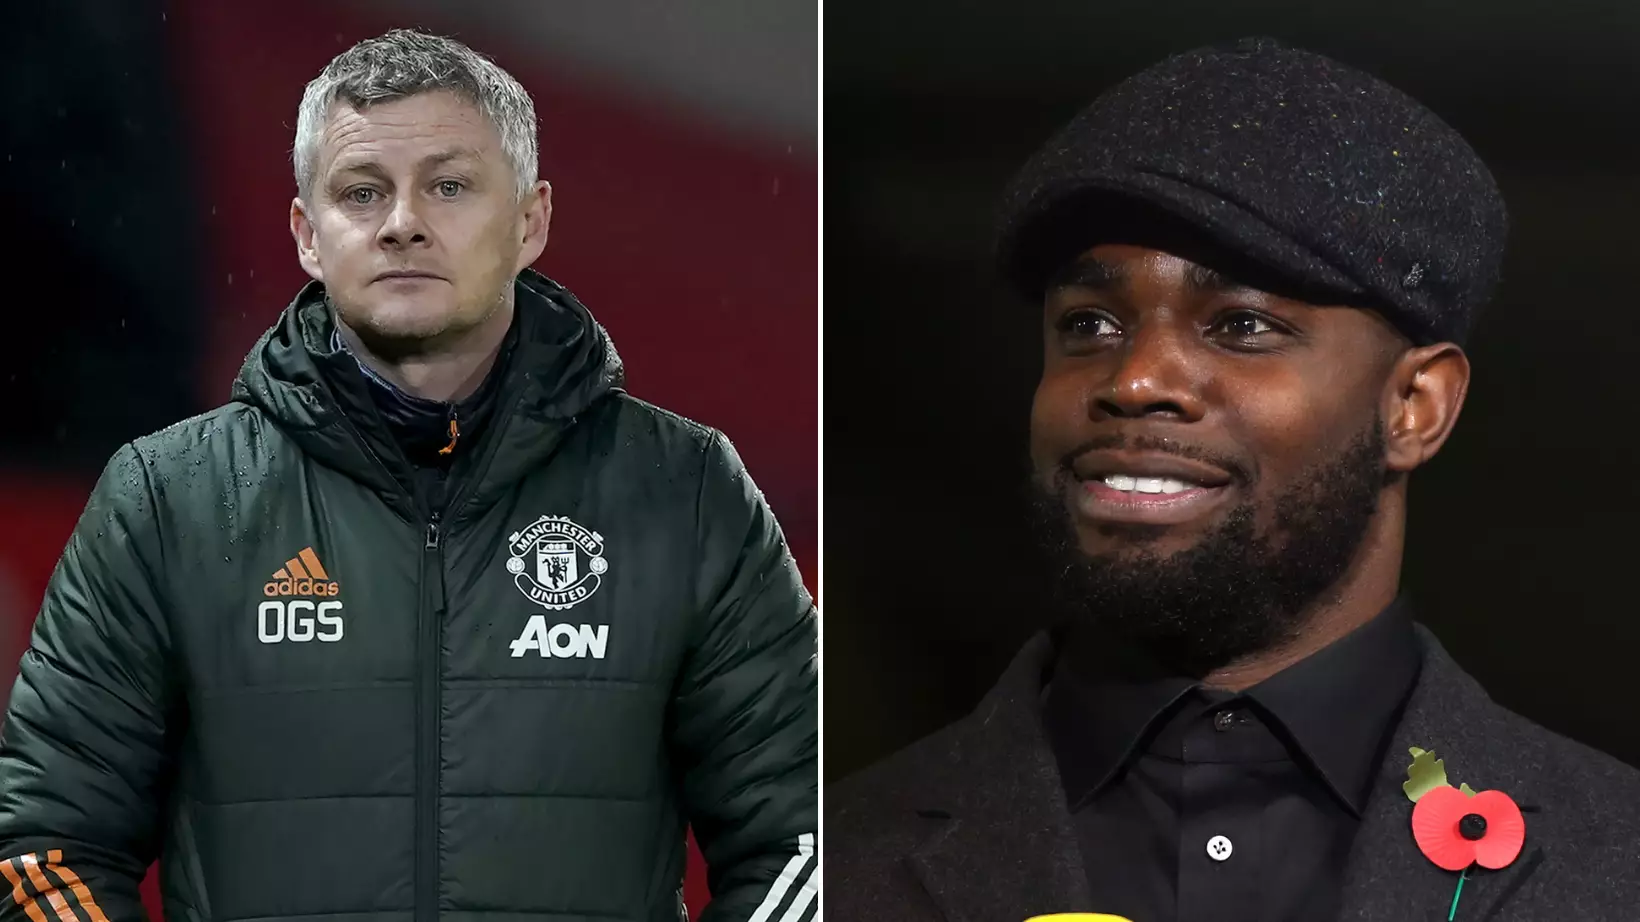 'The Culture Has Changed And Standards Have Lowered At Manchester United,' Says Micah Richards